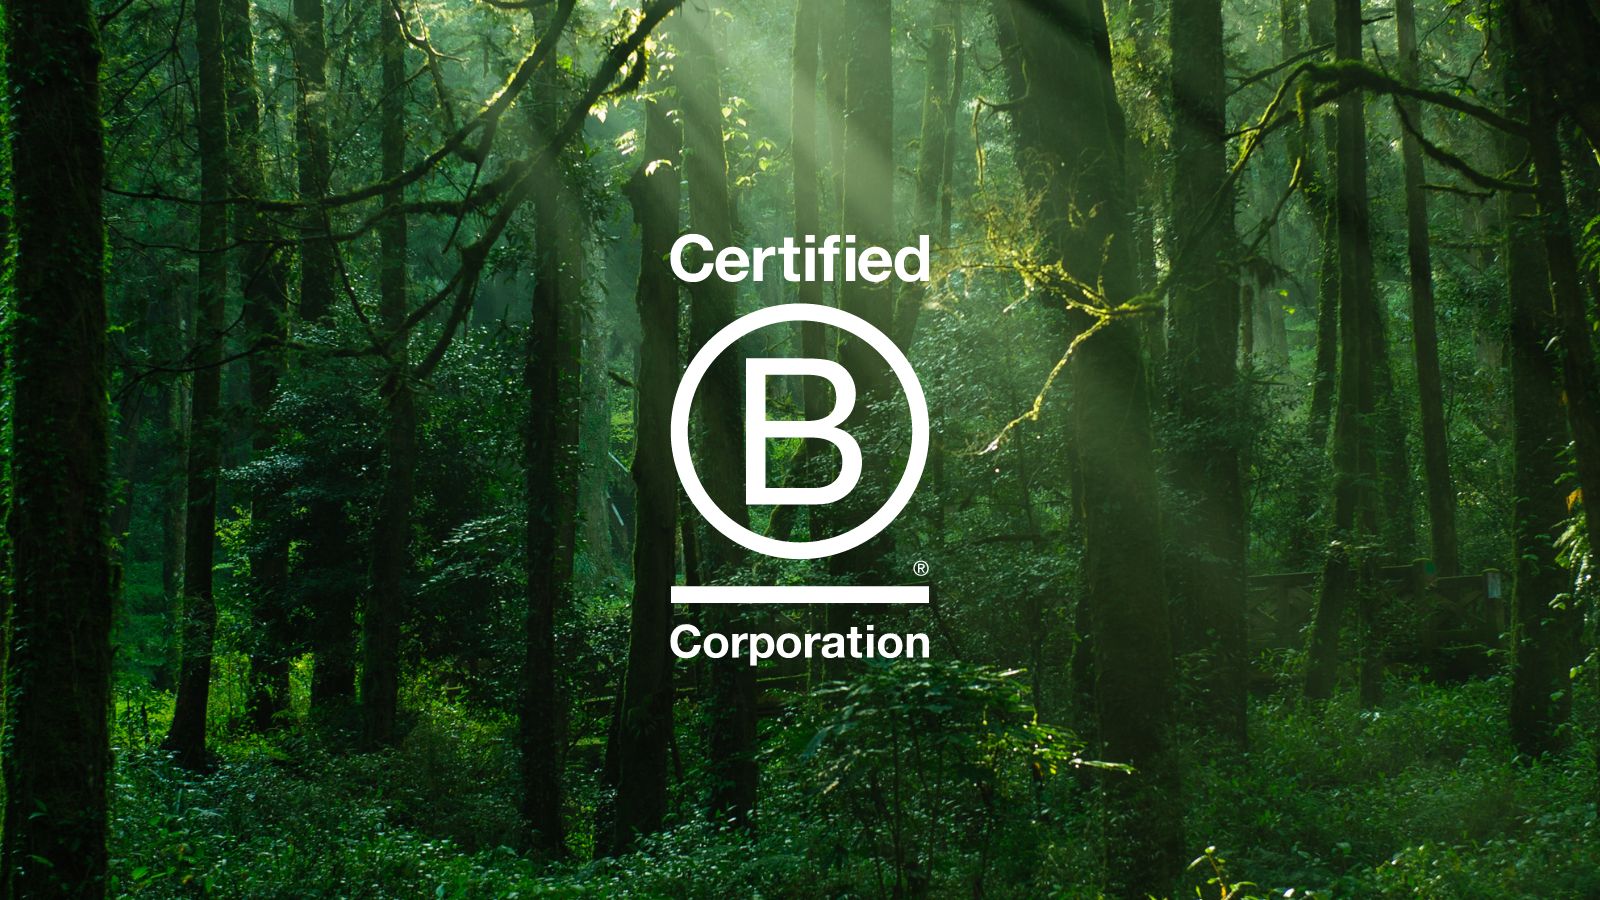 We’re officially B Corp Certified!